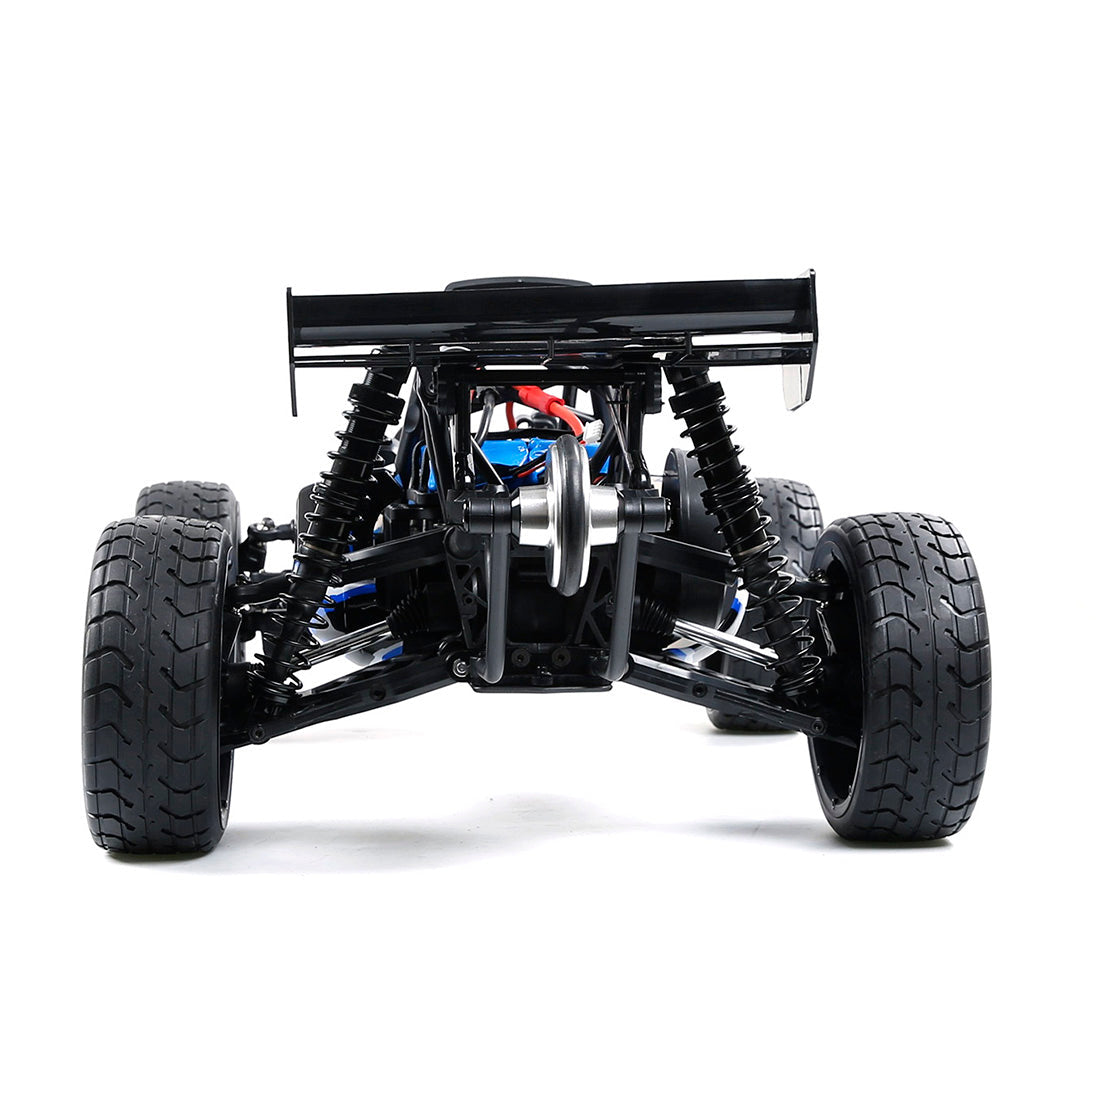 ROFUN EQ6 1/6 90+KM/H 2WD Rear Drive Brushless Off-road Vehicle 2.4G RC High Speed Model Car without Battery and Charger